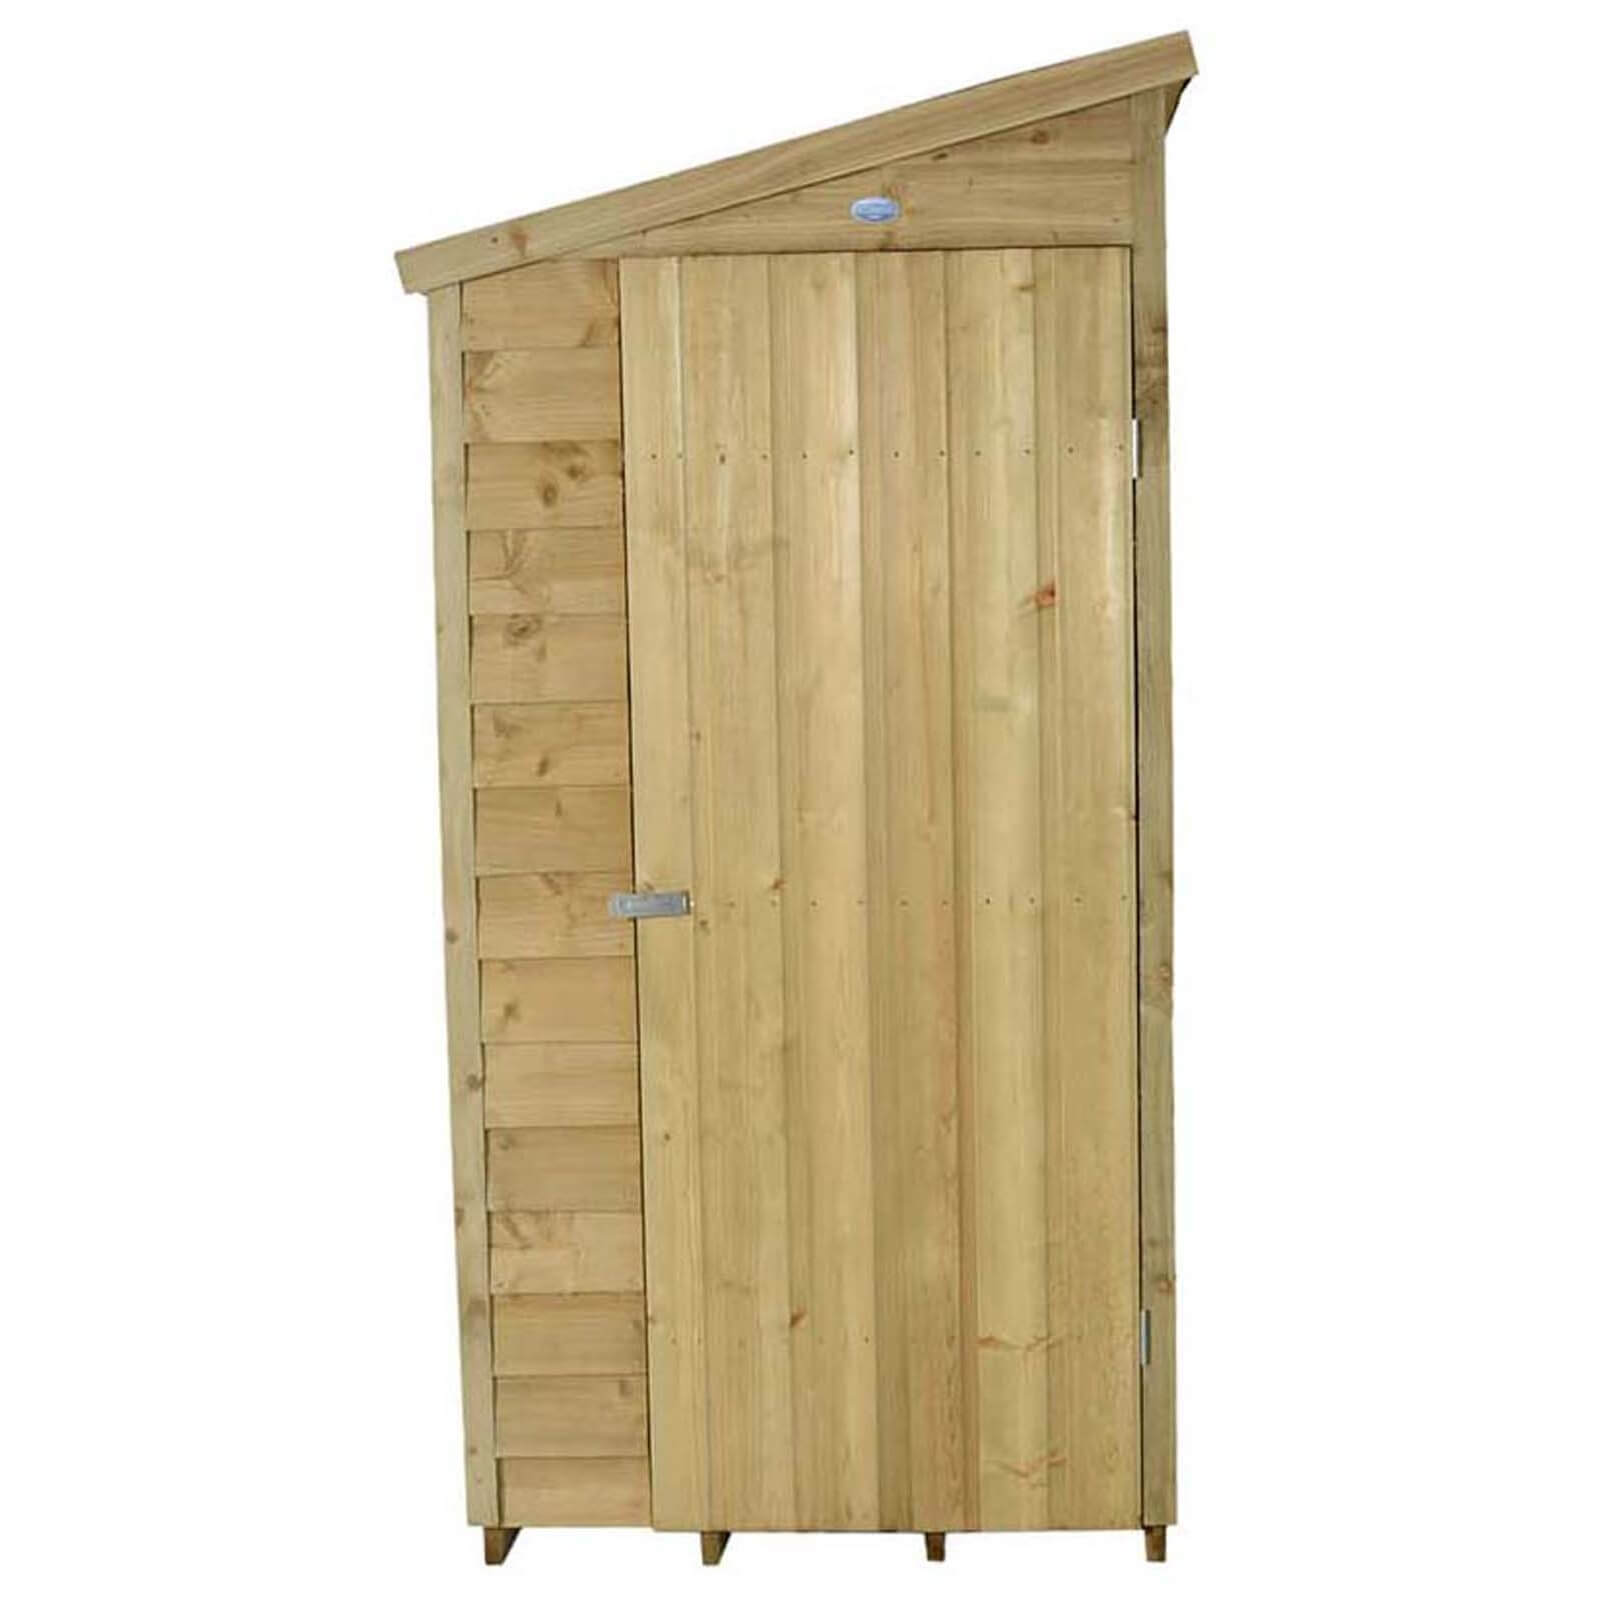 6x3ft Forest Wooden Overlap Pressure Treated Pent Shed -incl. Installation